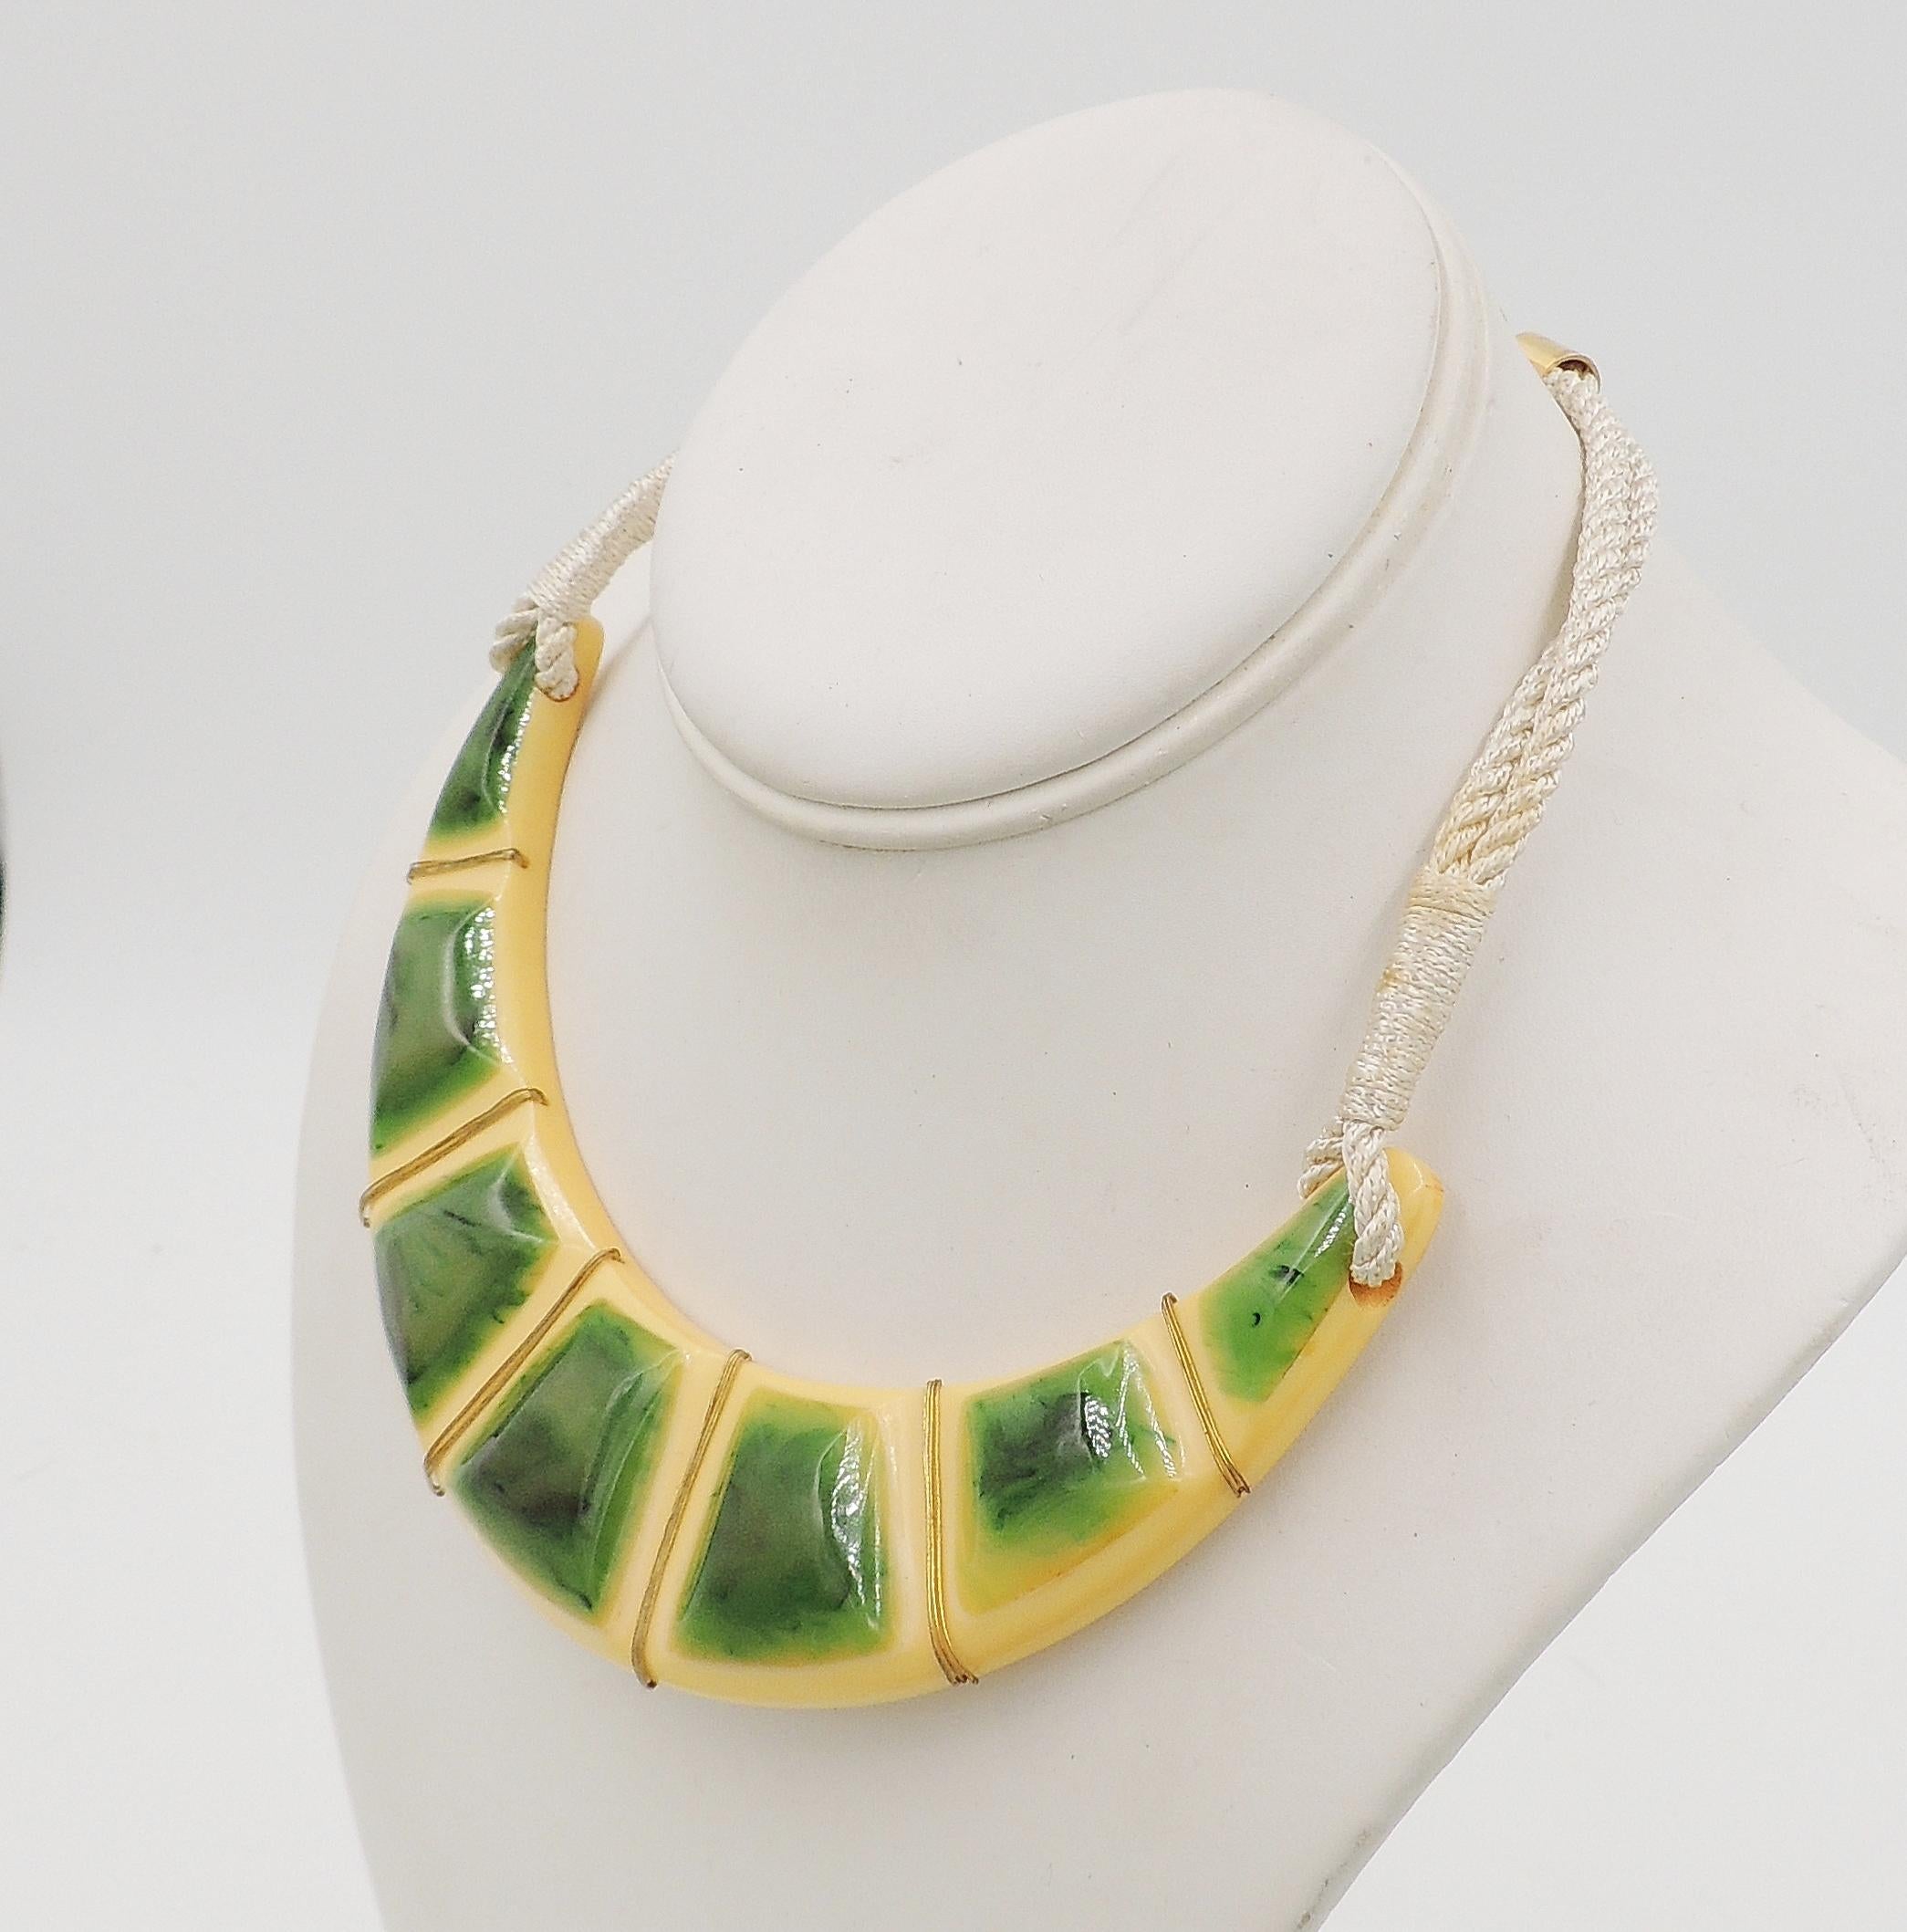 Vintage 1970s Signed Valentino Wrapped Green & Ivory Lucite Collar Necklace In Good Condition For Sale In Easton, PA